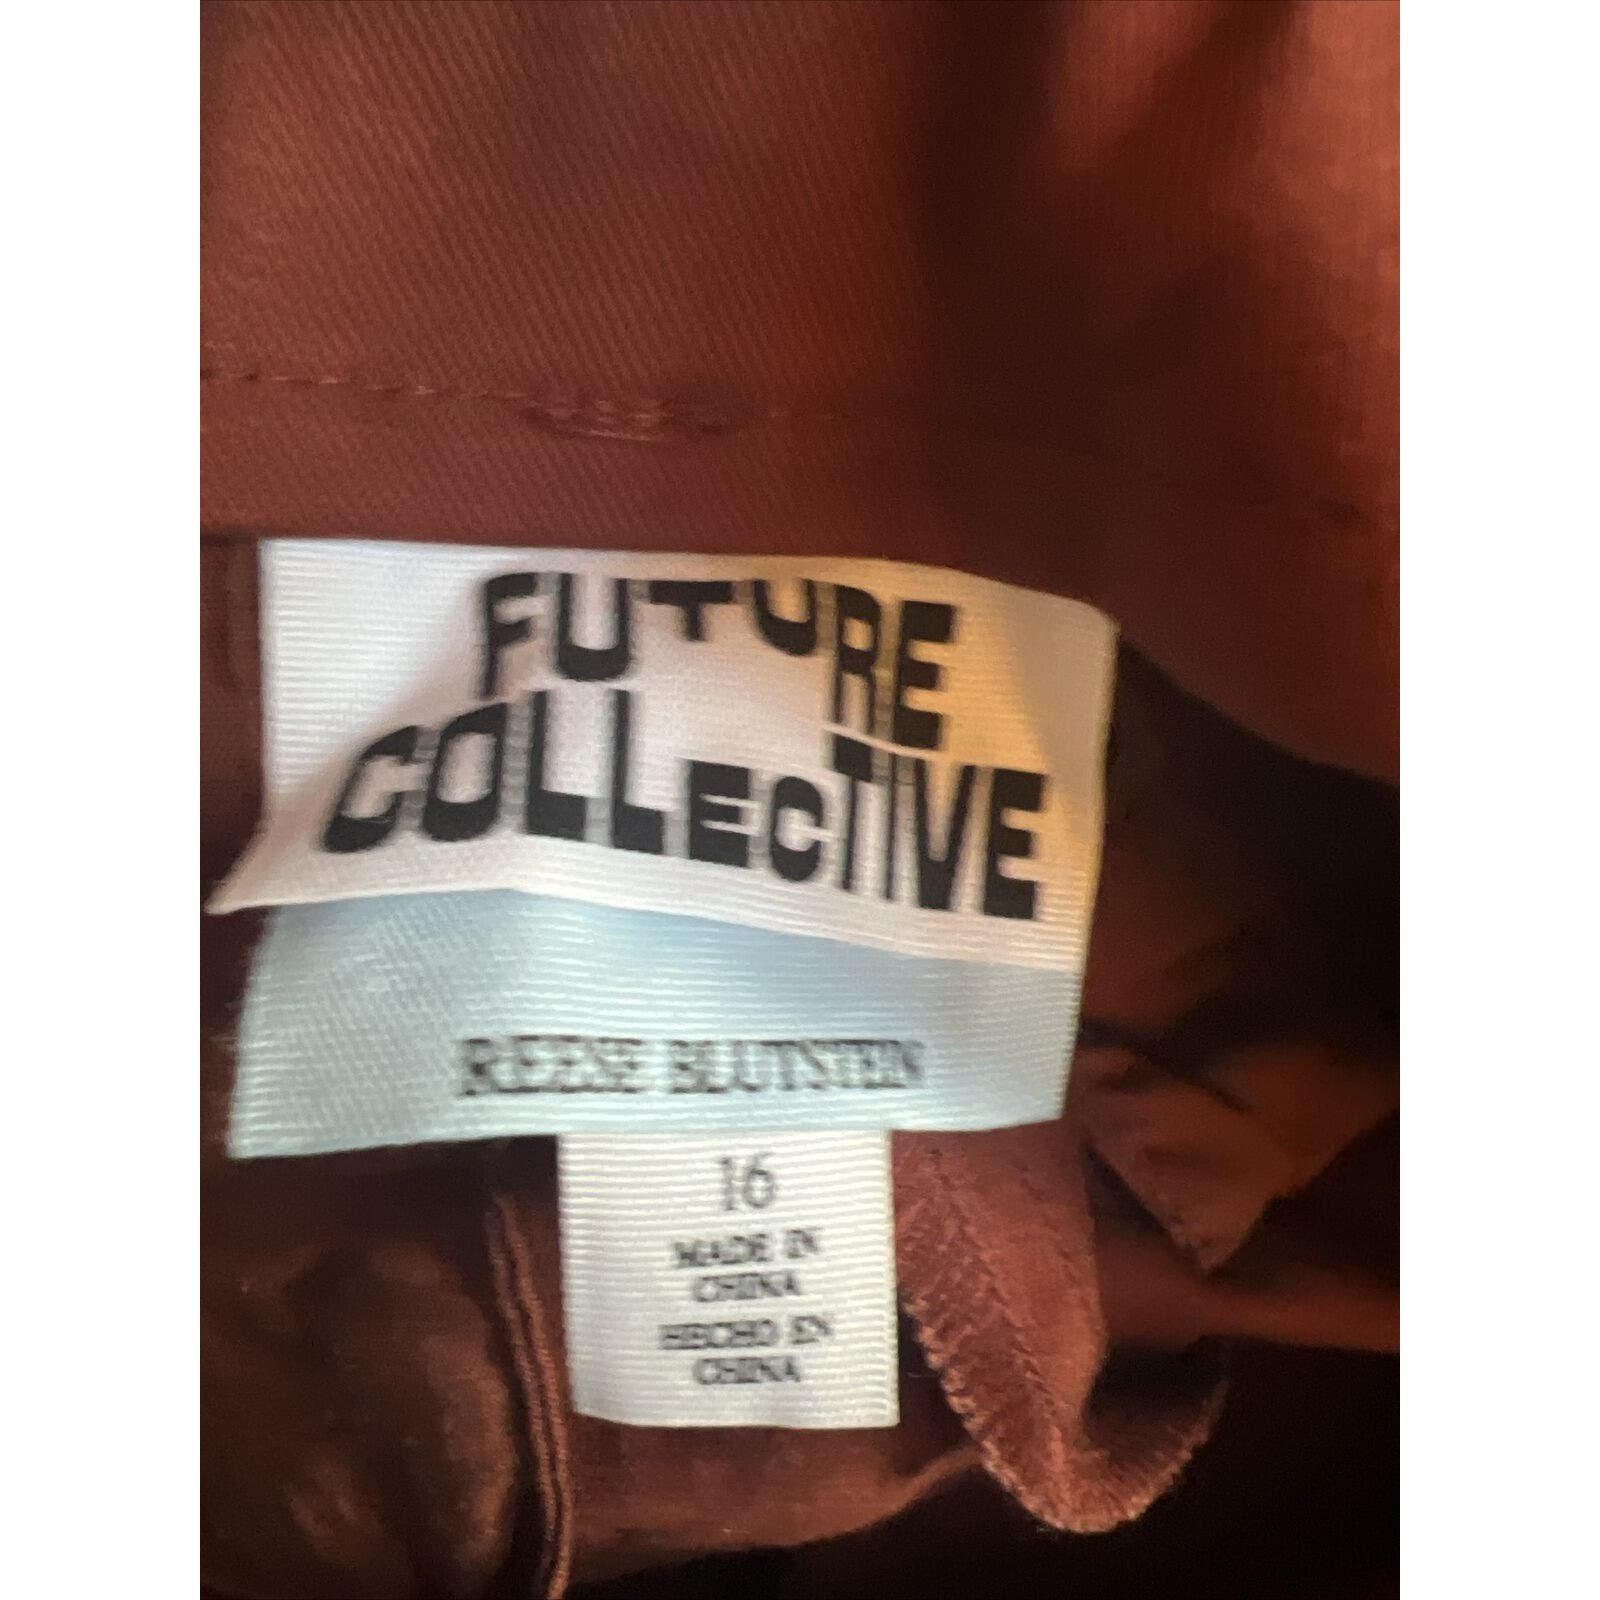 high discount Women´s Saddle Wrap Pant - Future Collective with Reese Blutstein Red 16 NWT I2KpOwXeR well sale